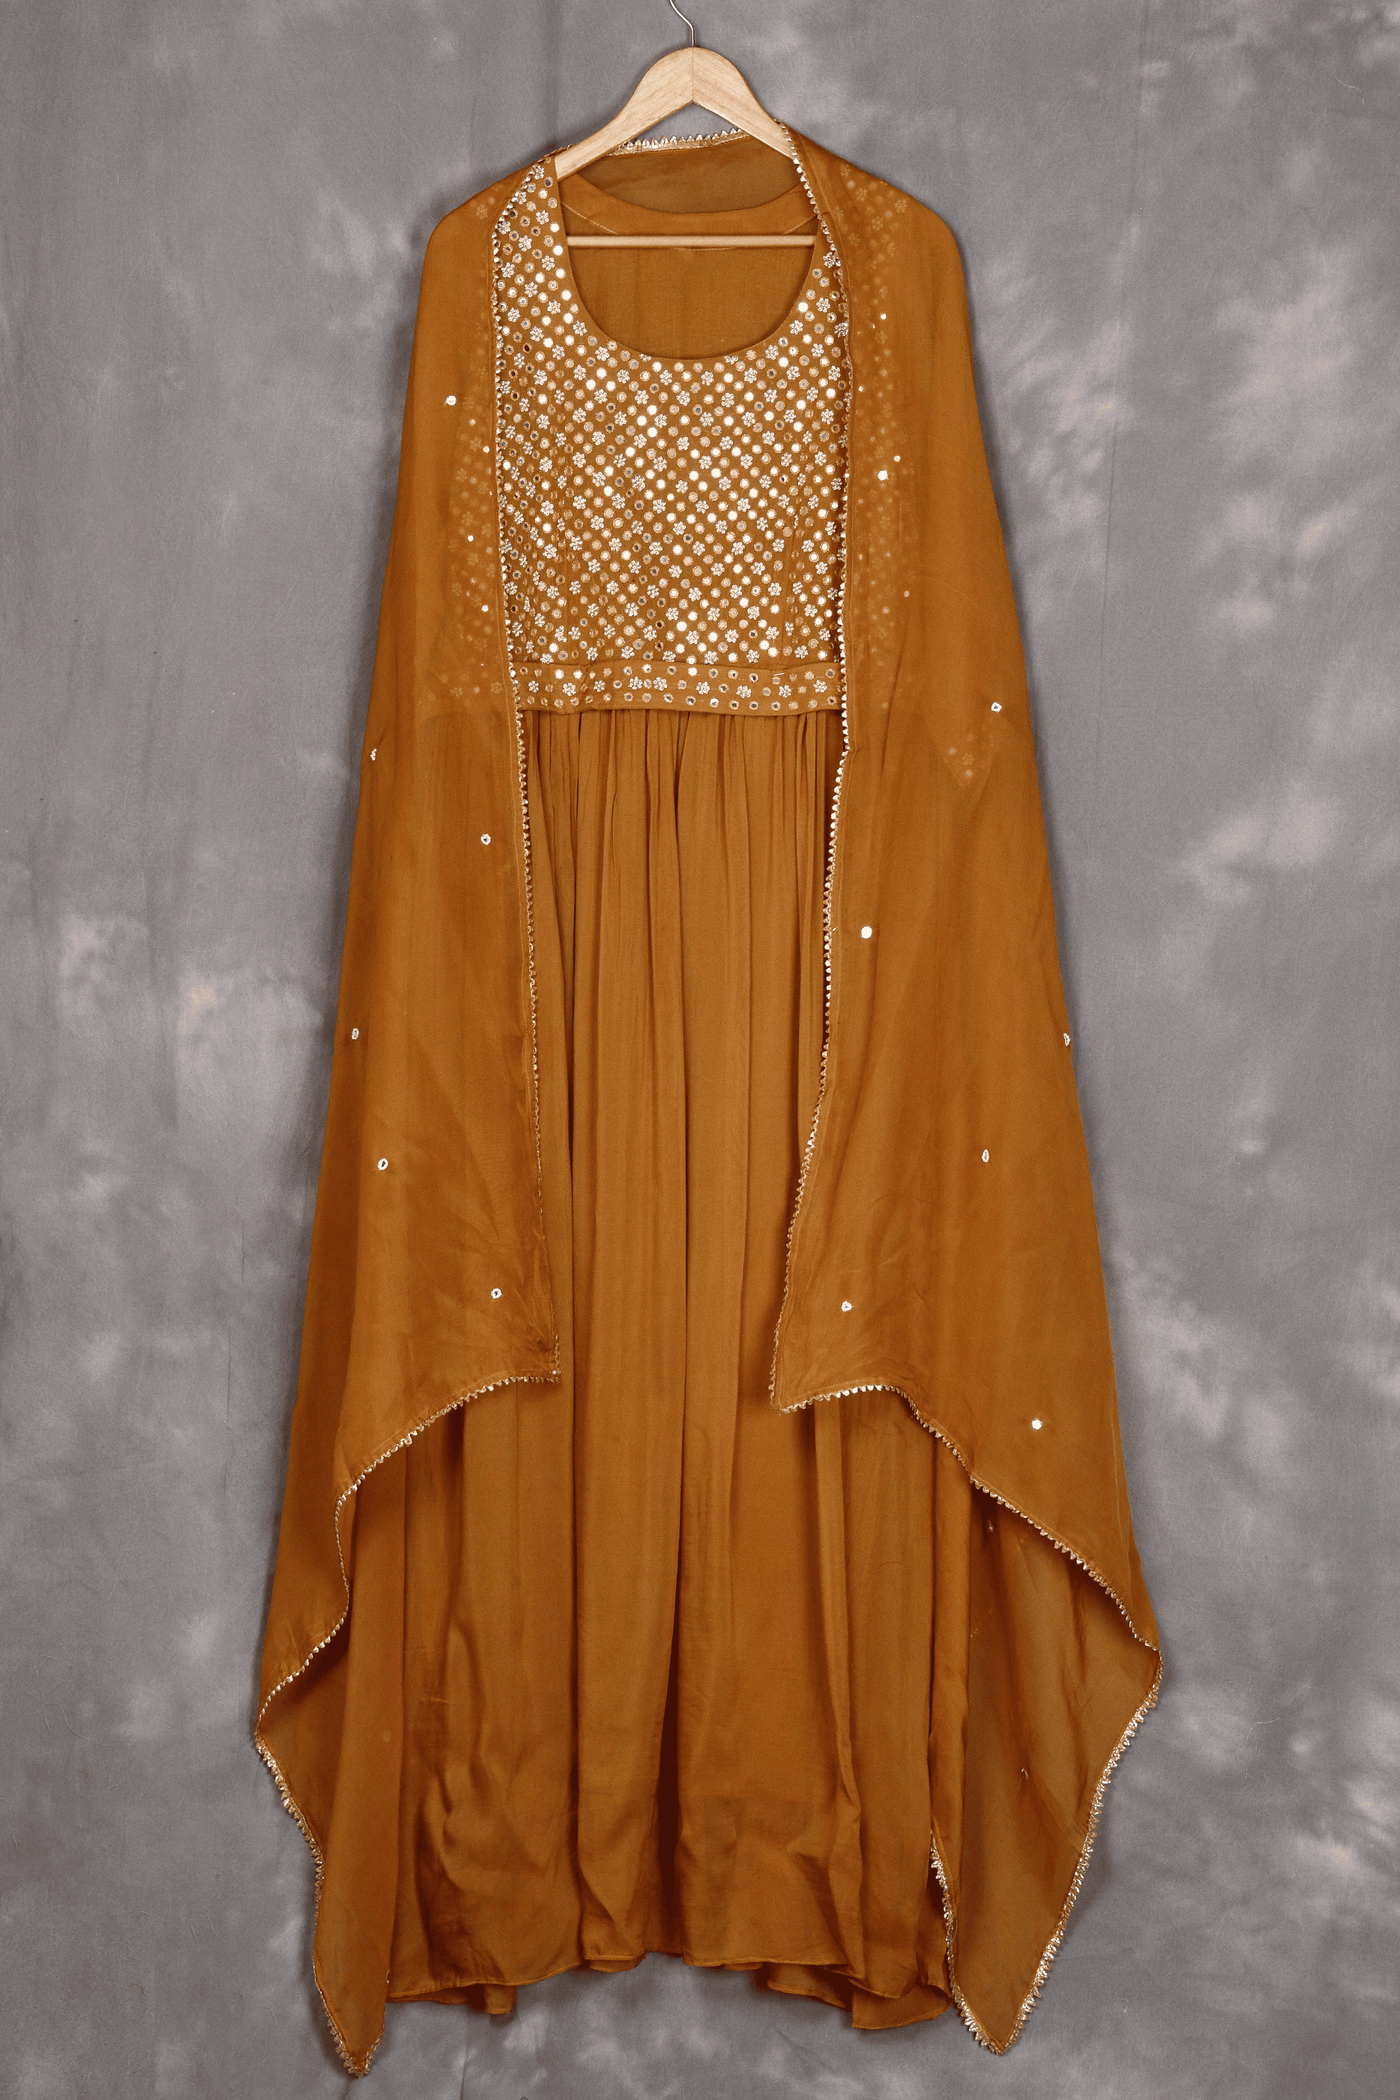 Mehendi muslin hand embroidery gown with dupatta